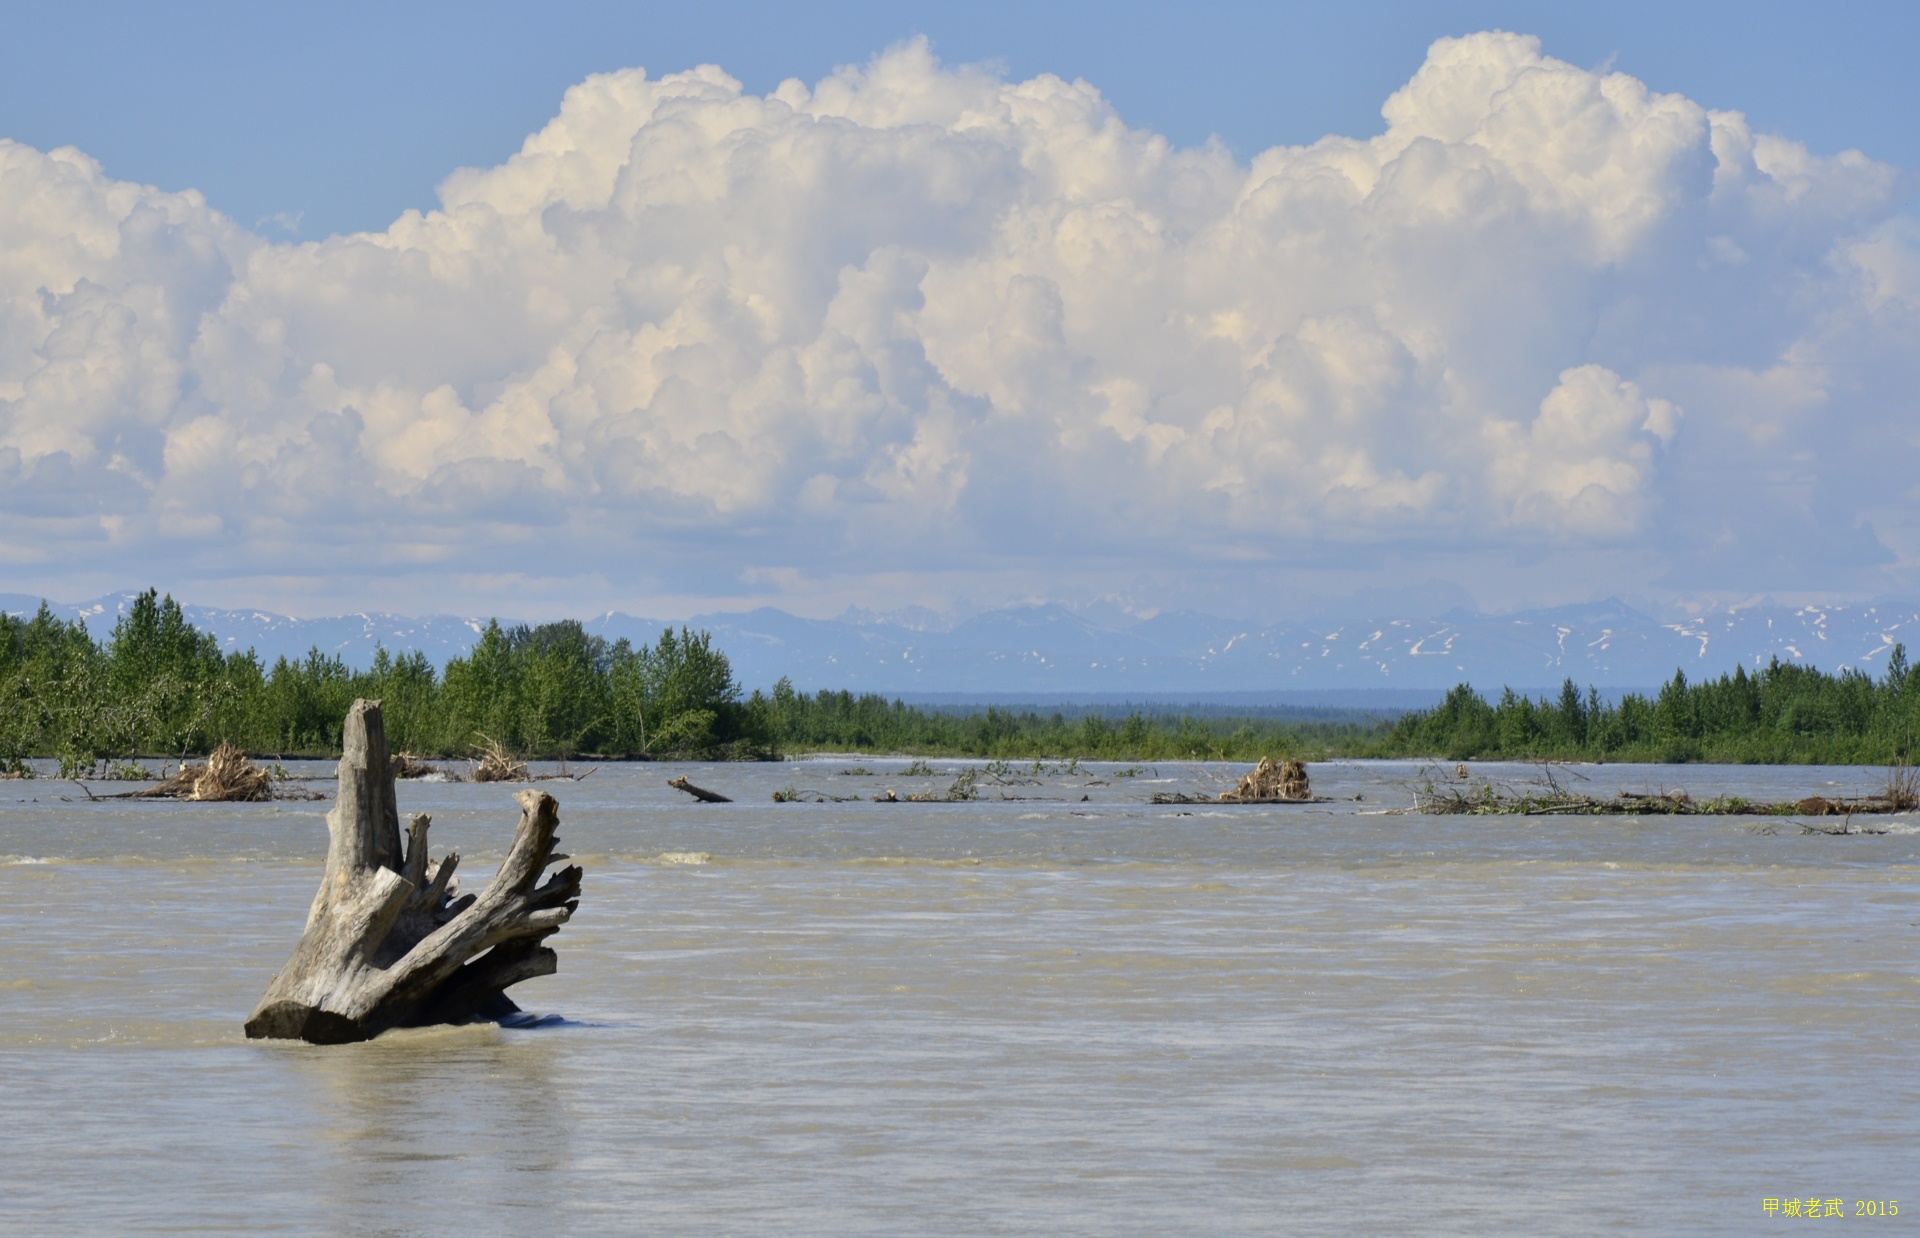 The river and mountains in Kalkeetna